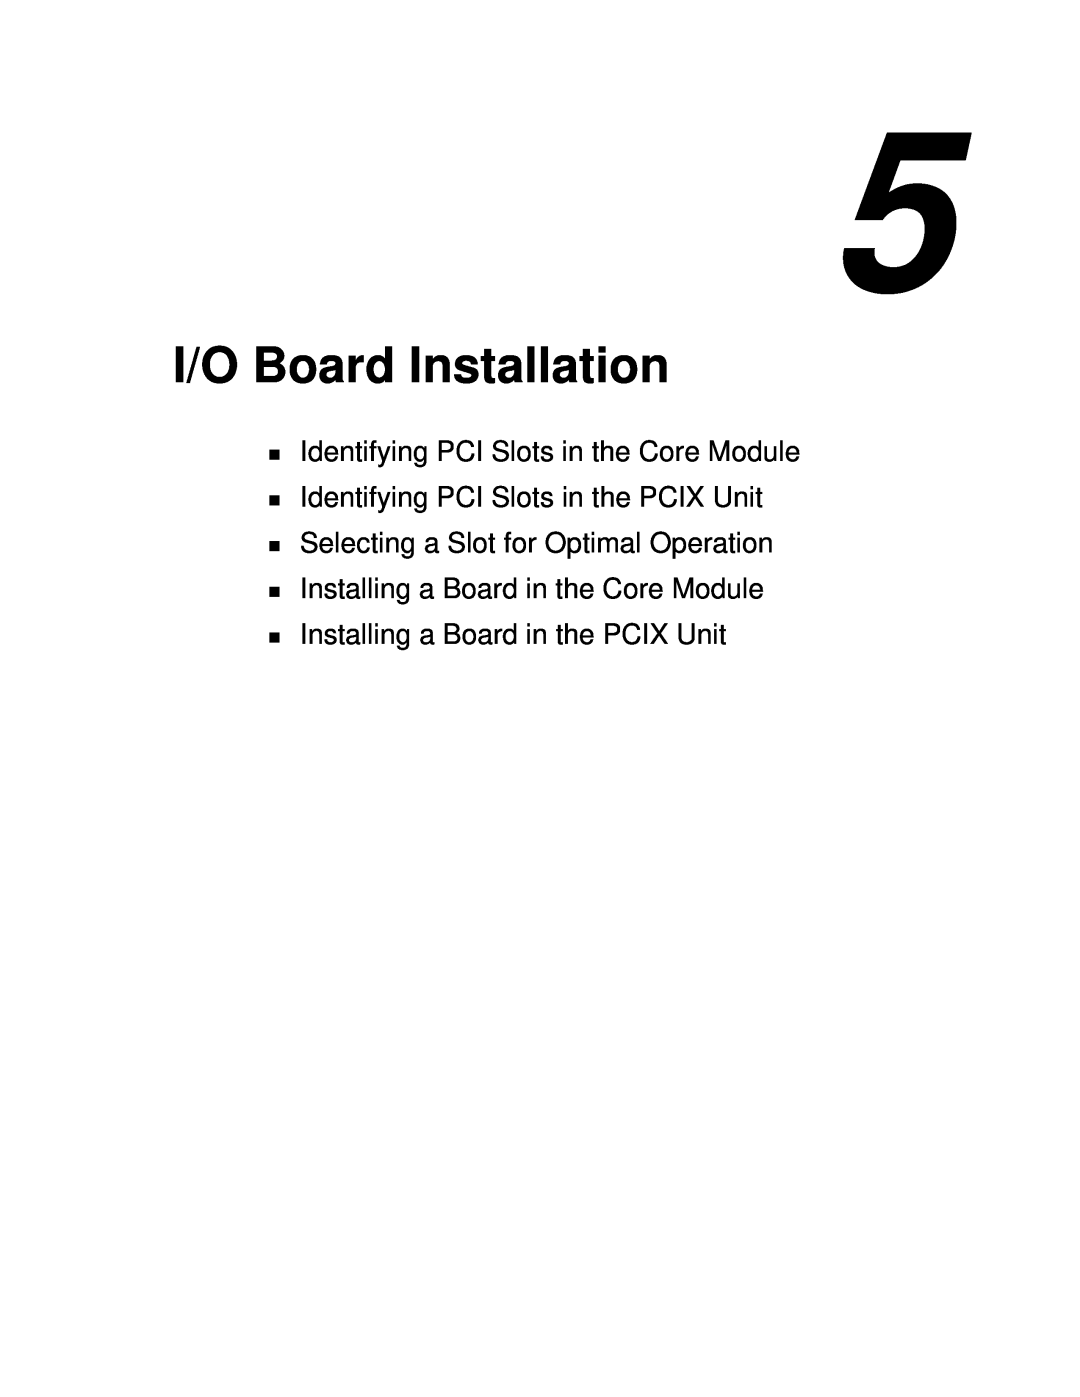 NEC 1080Xd manual I/O Board Installation, Identifying PCI Slots in the Core Module, Identifying PCI Slots in the PCIX Unit 